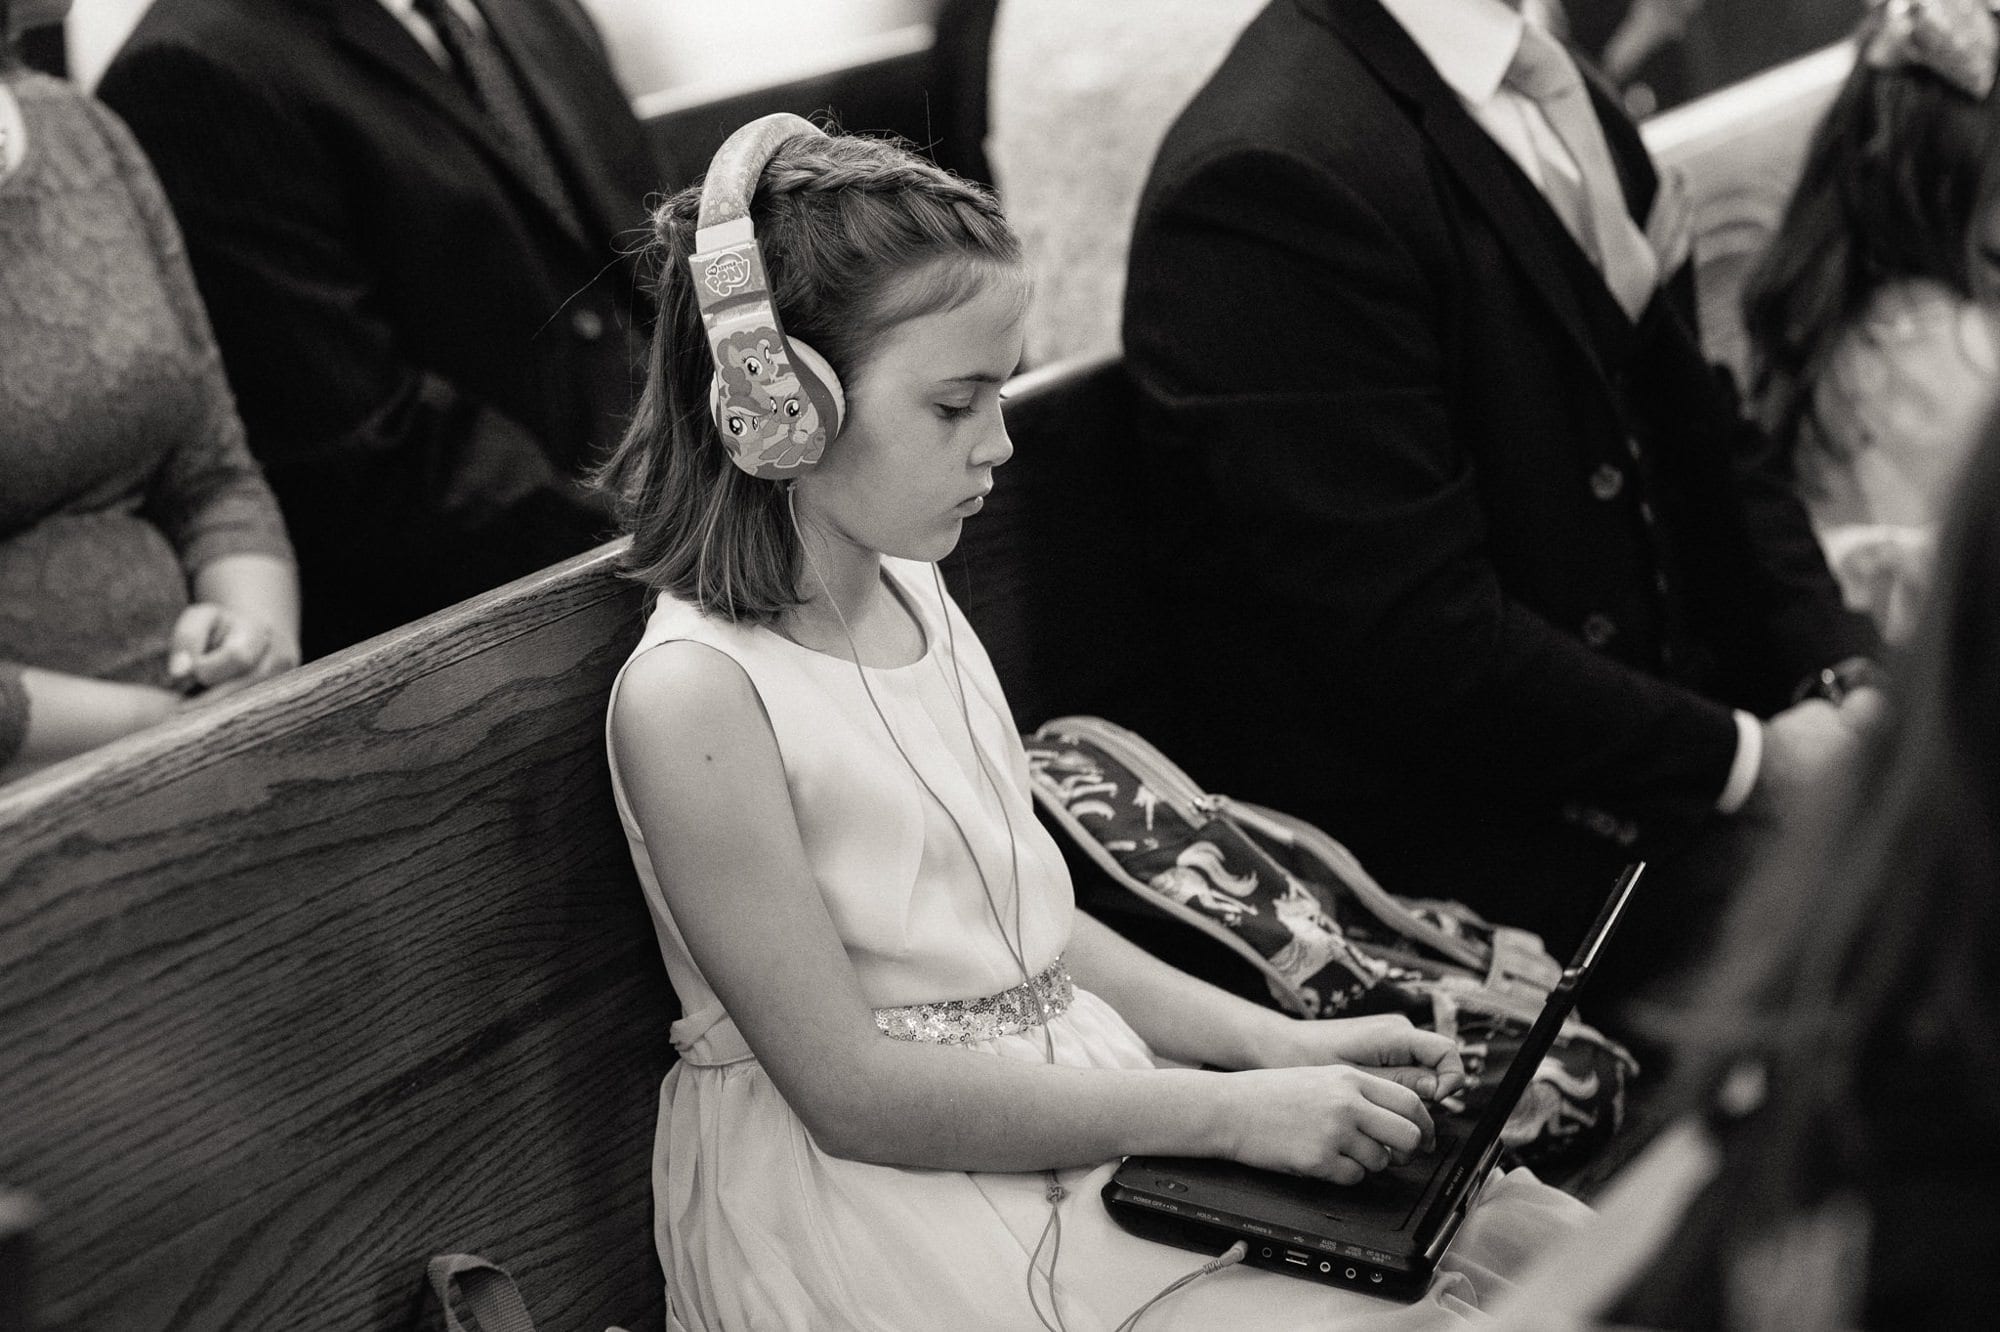 young girl on laptop with headphones on